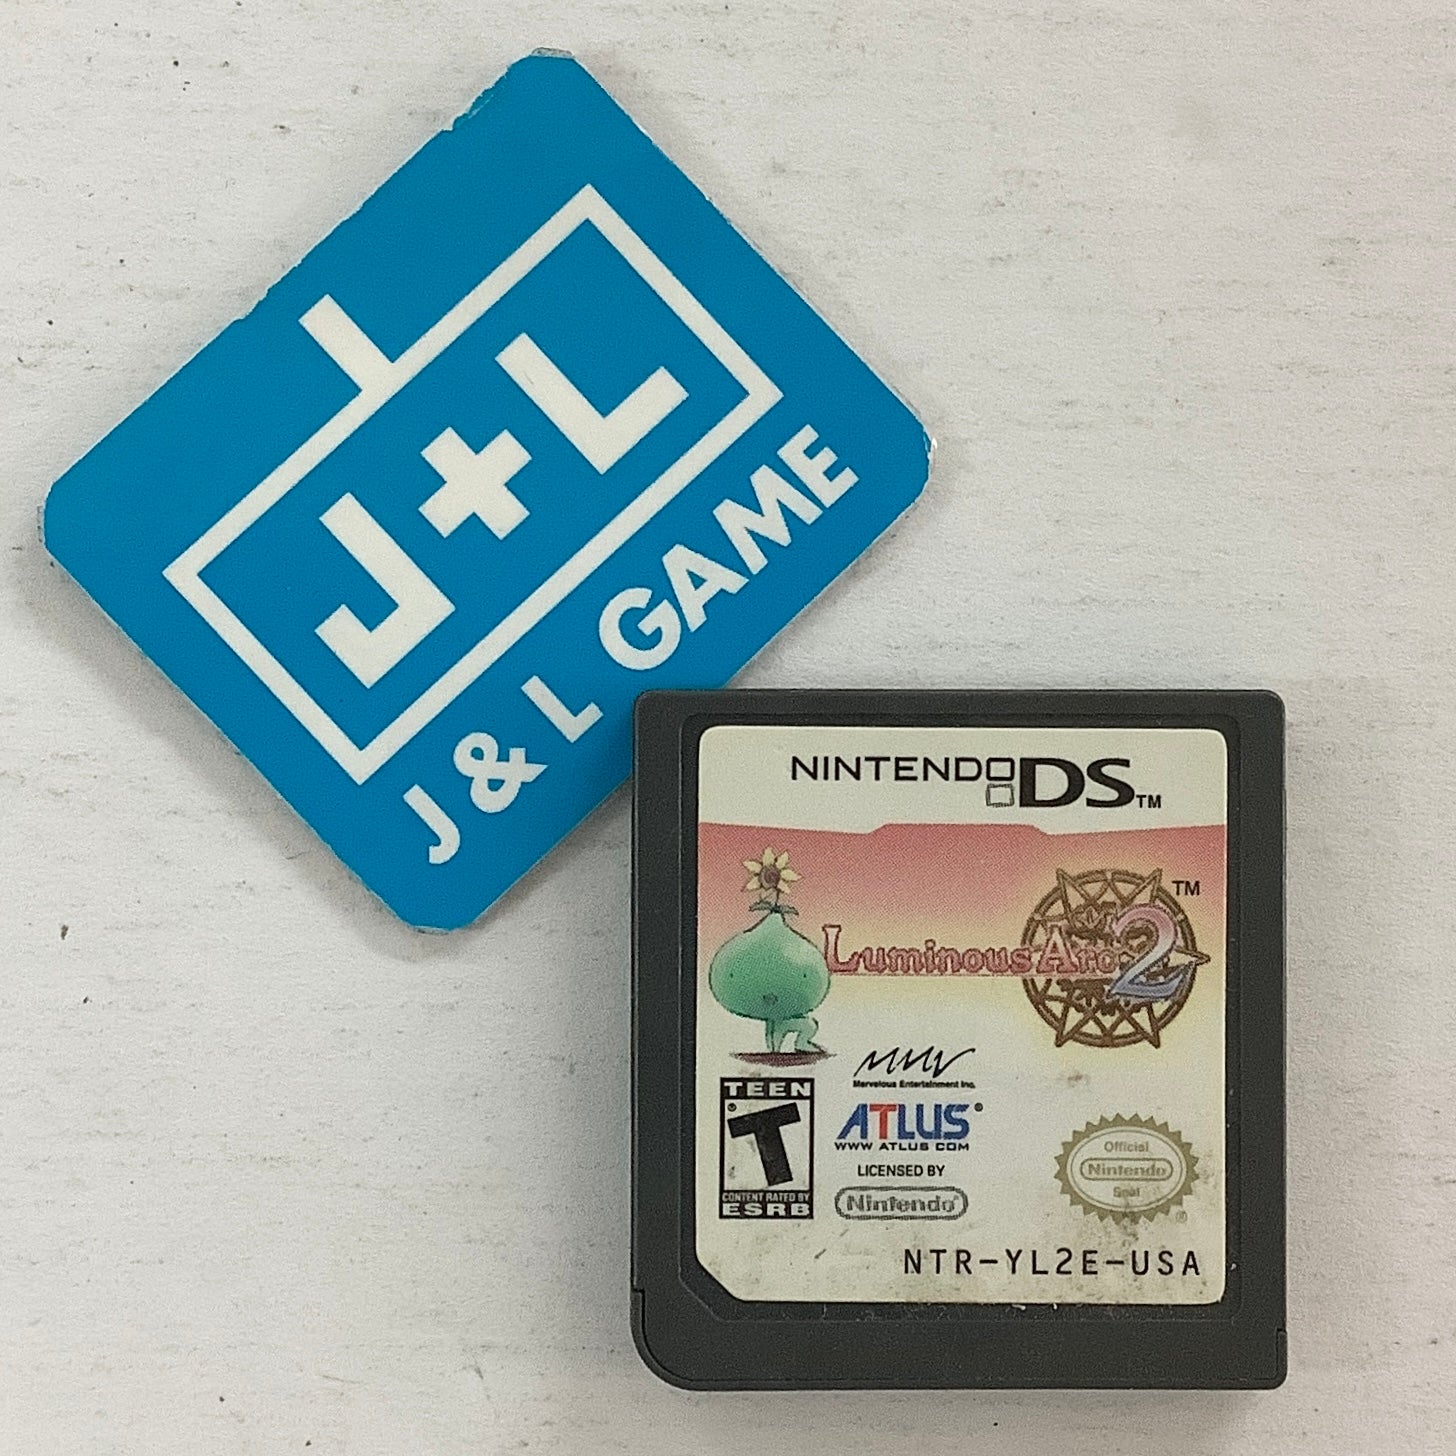 Luminous Arc 2 - (NDS) Nintendo DS [Pre-Owned]